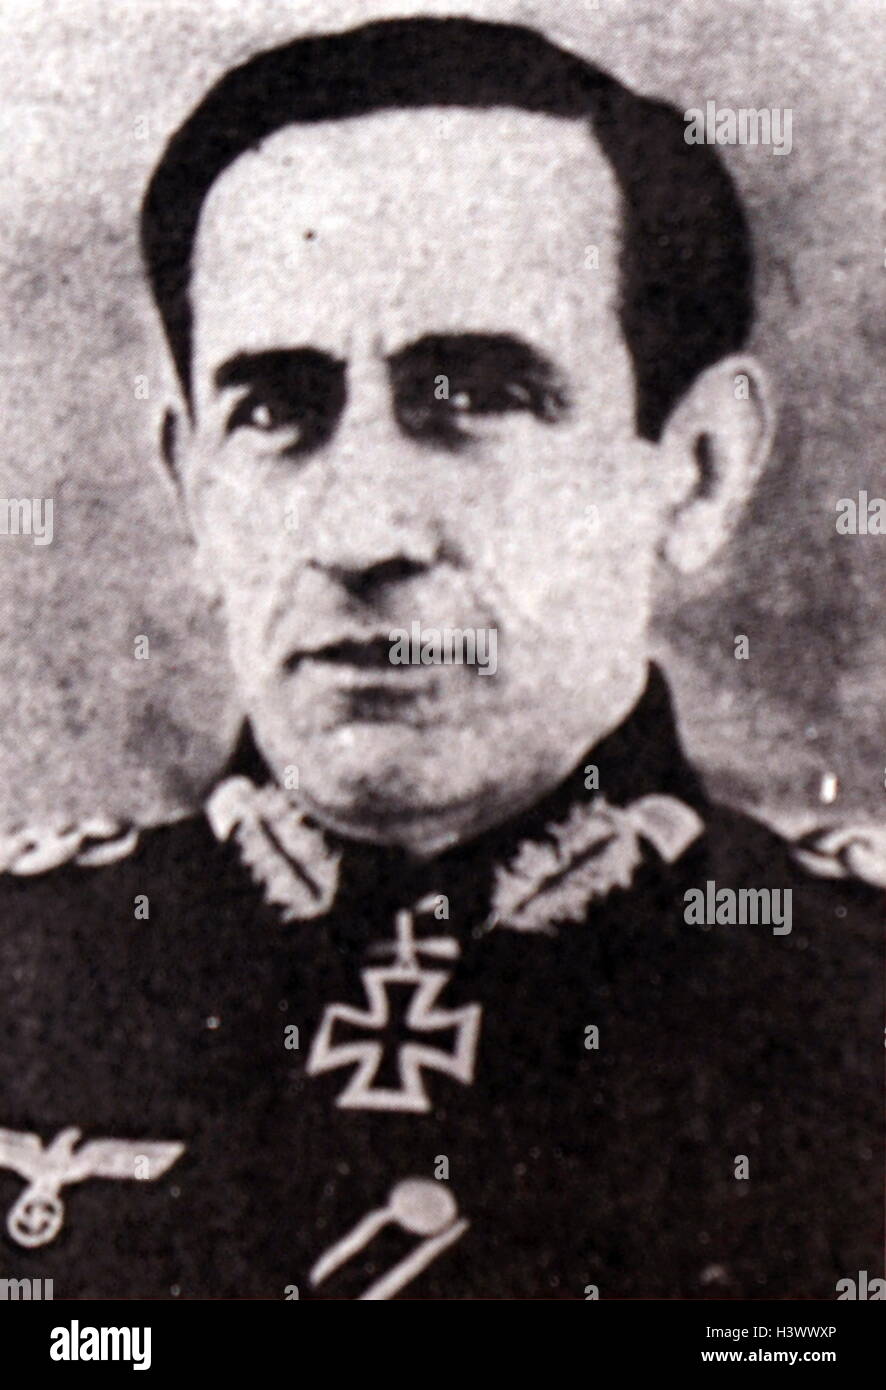 Photographic portrait of Agustín Muñoz Grandes (1896-1970) a Spanish general, politician, vice-president of the Spanish Government, and minister. Dated 20th Century Stock Photo